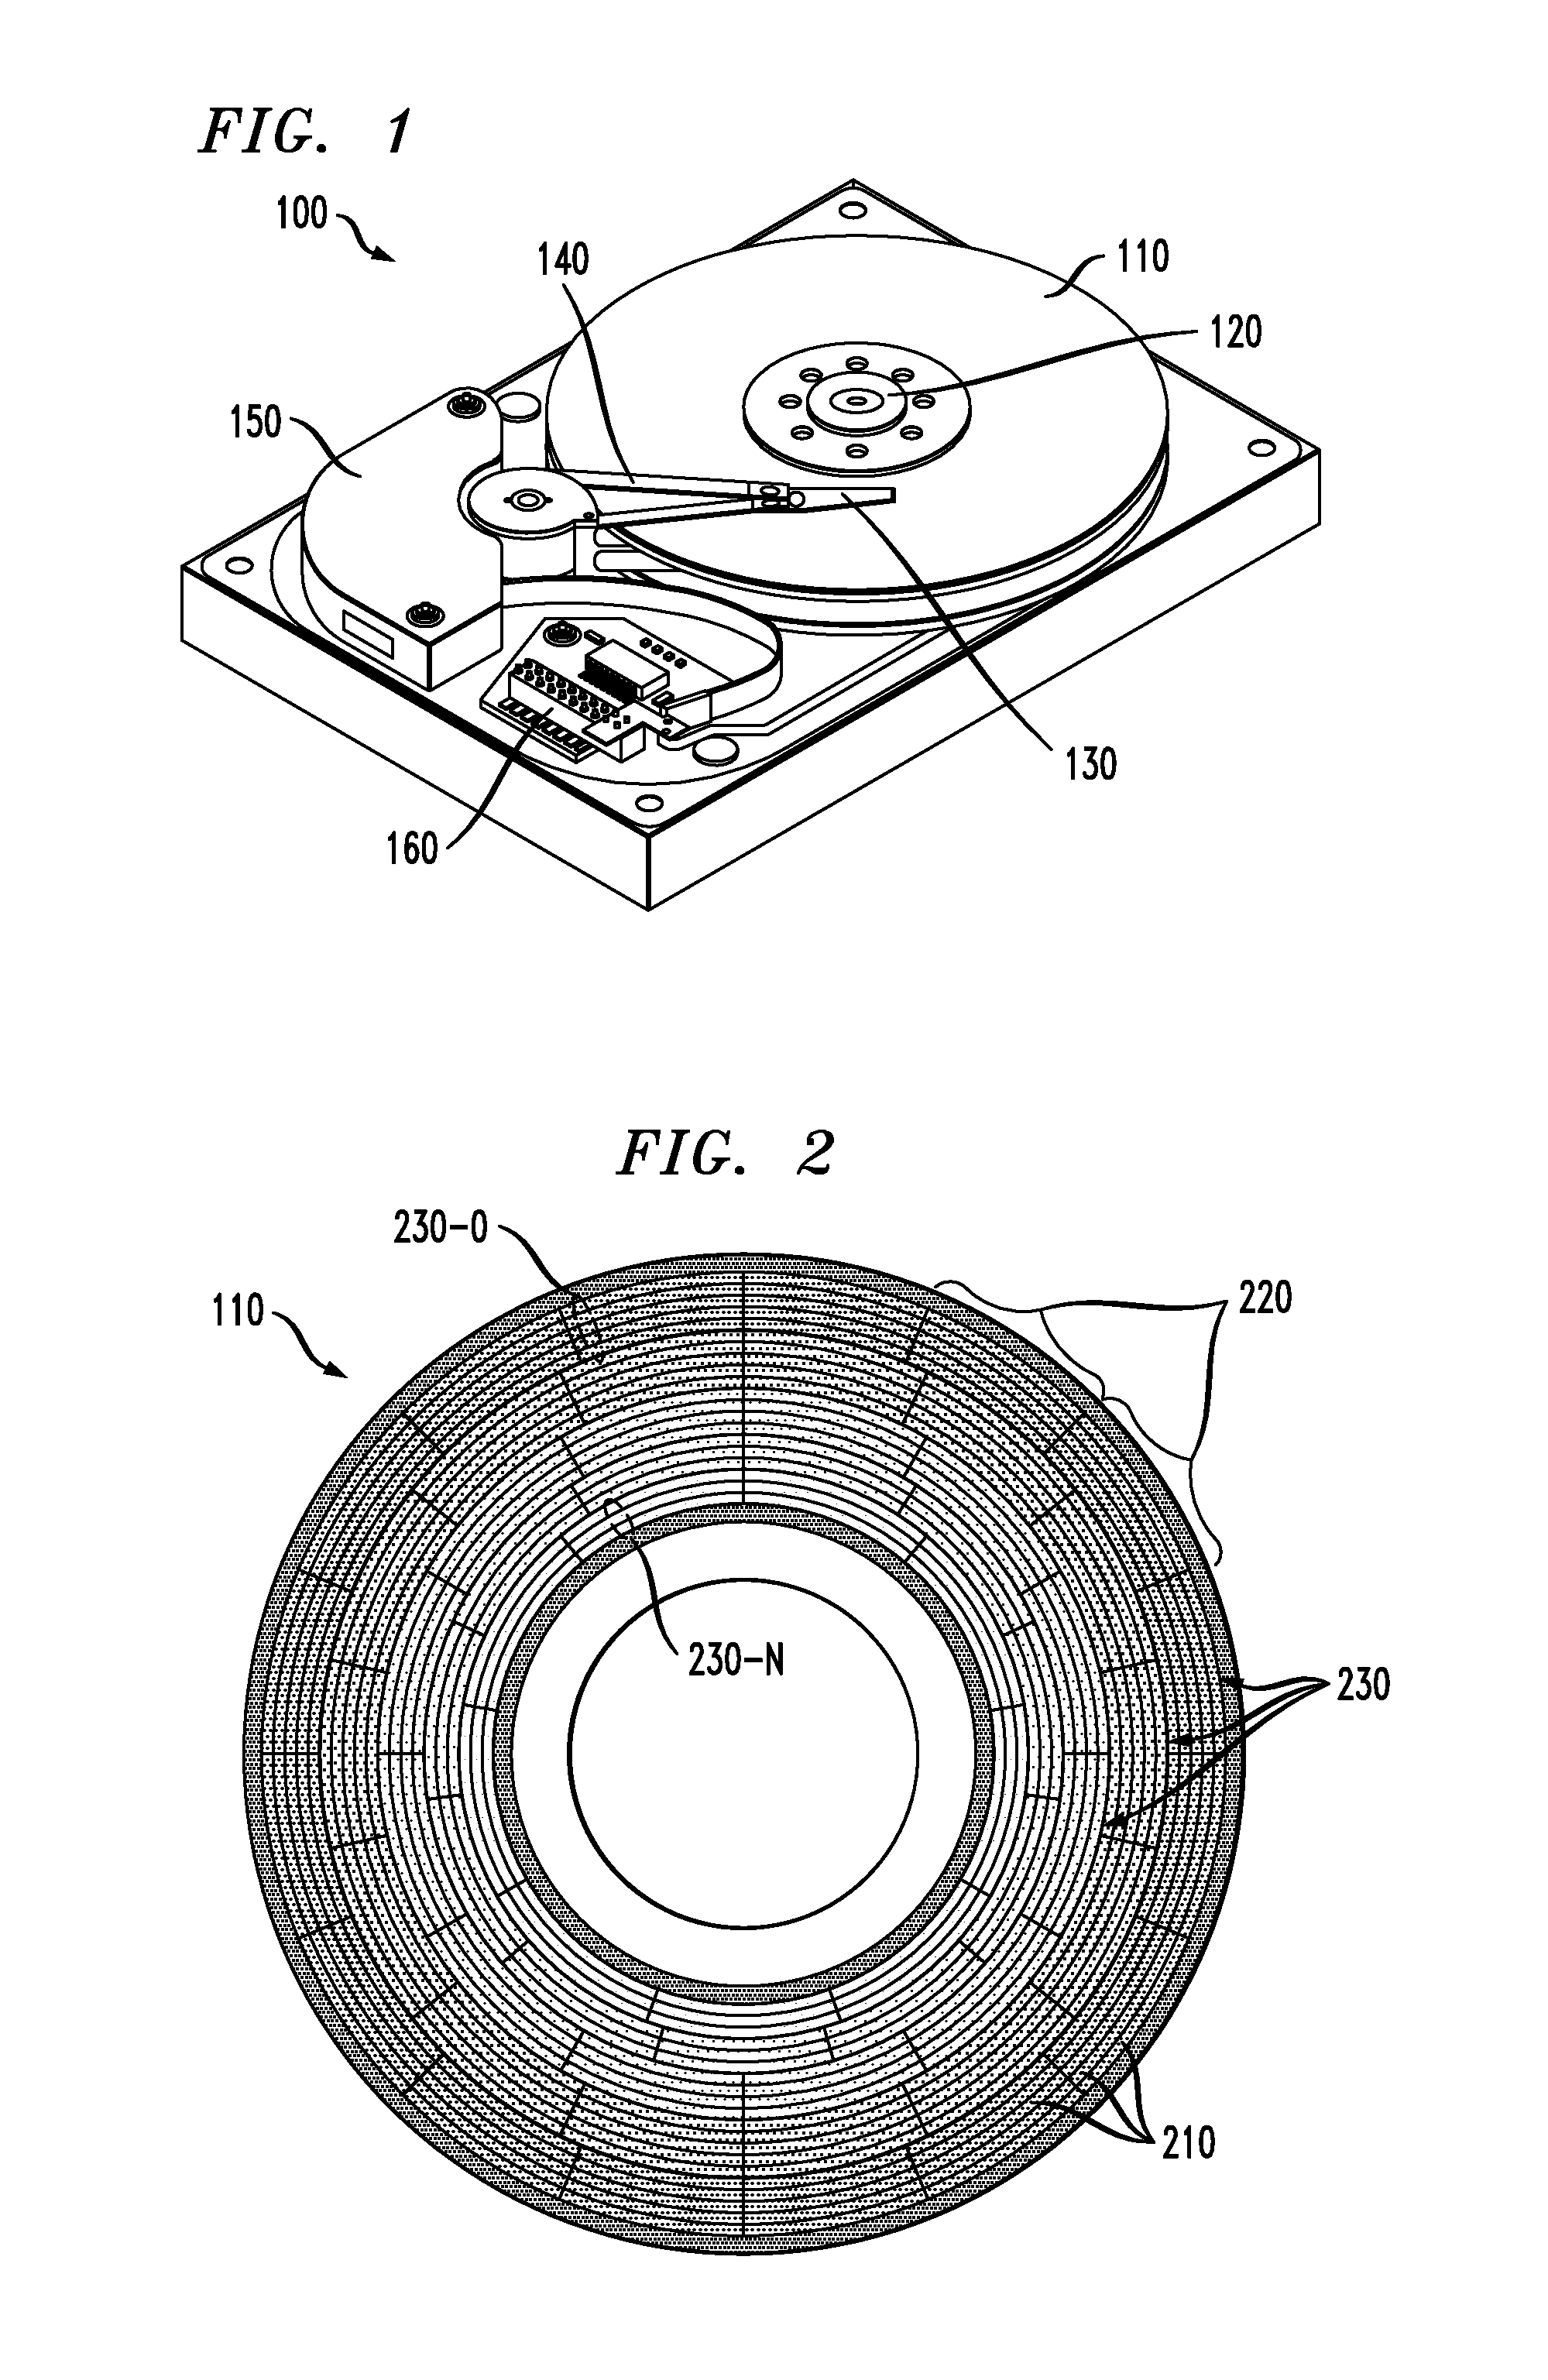 Disk-based storage device with frequently accessed partition